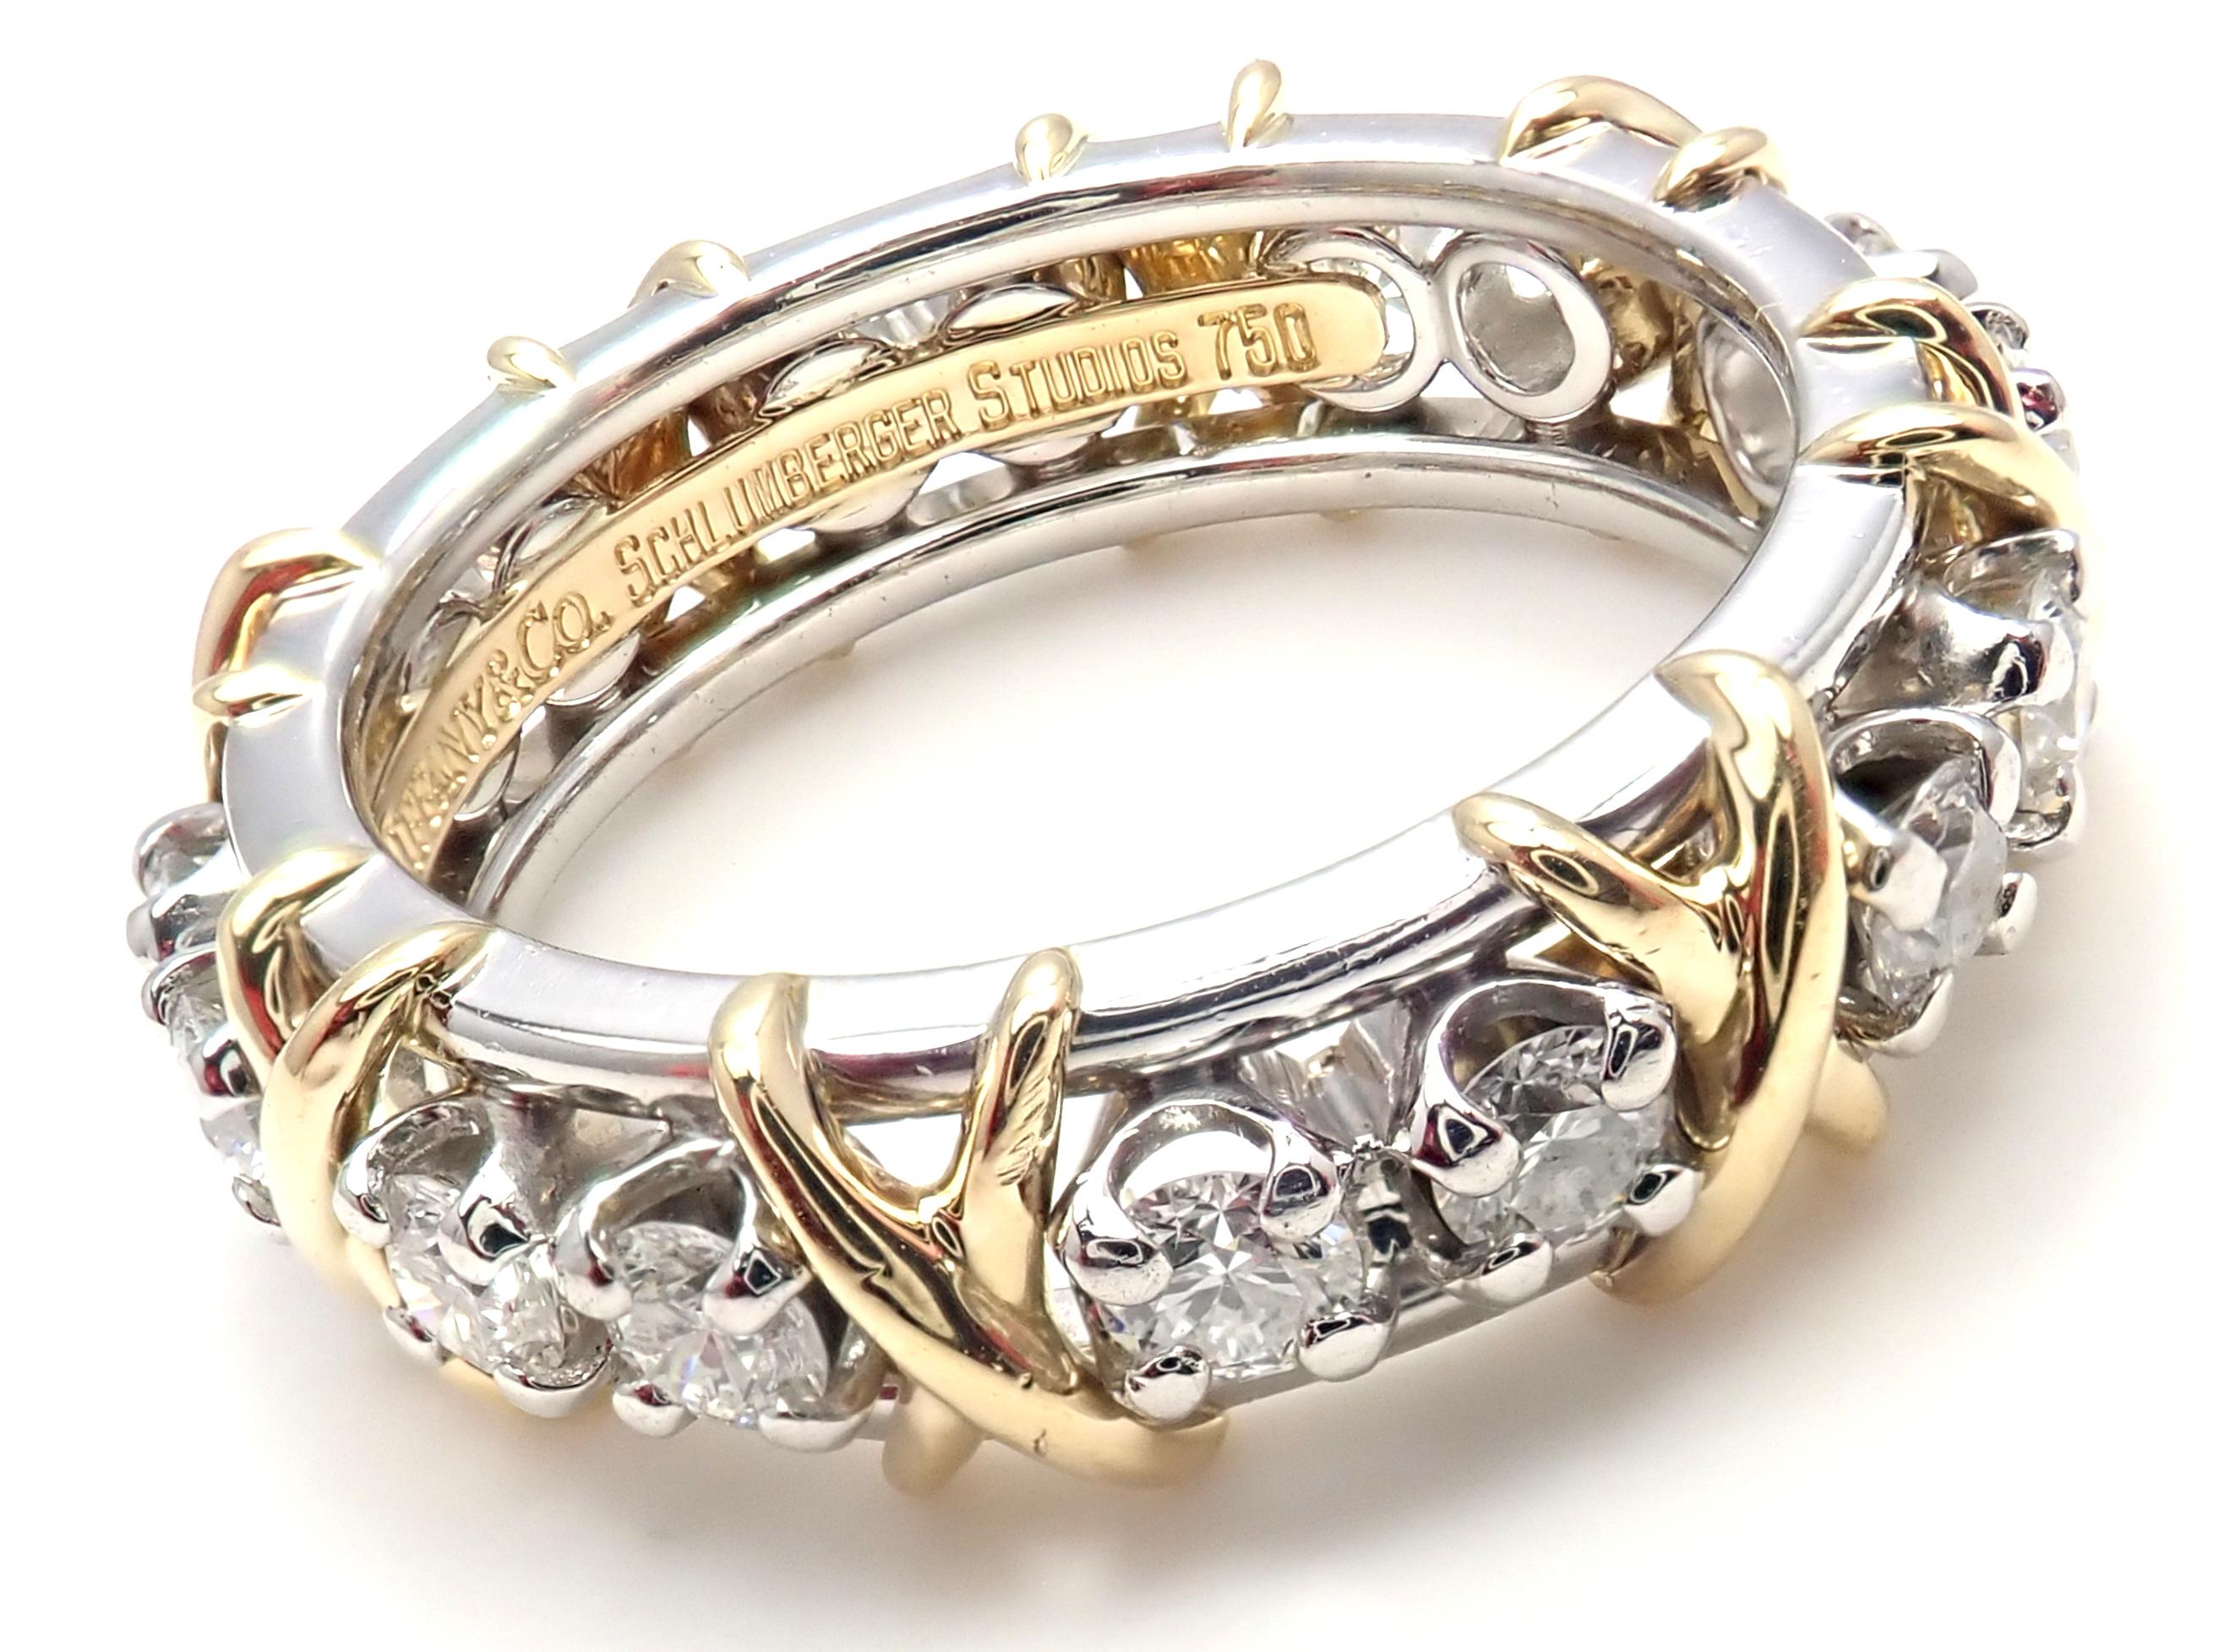 Tiffany & Co. Jean Schlumberger Yellow Gold and Platinum Diamond Ring 2